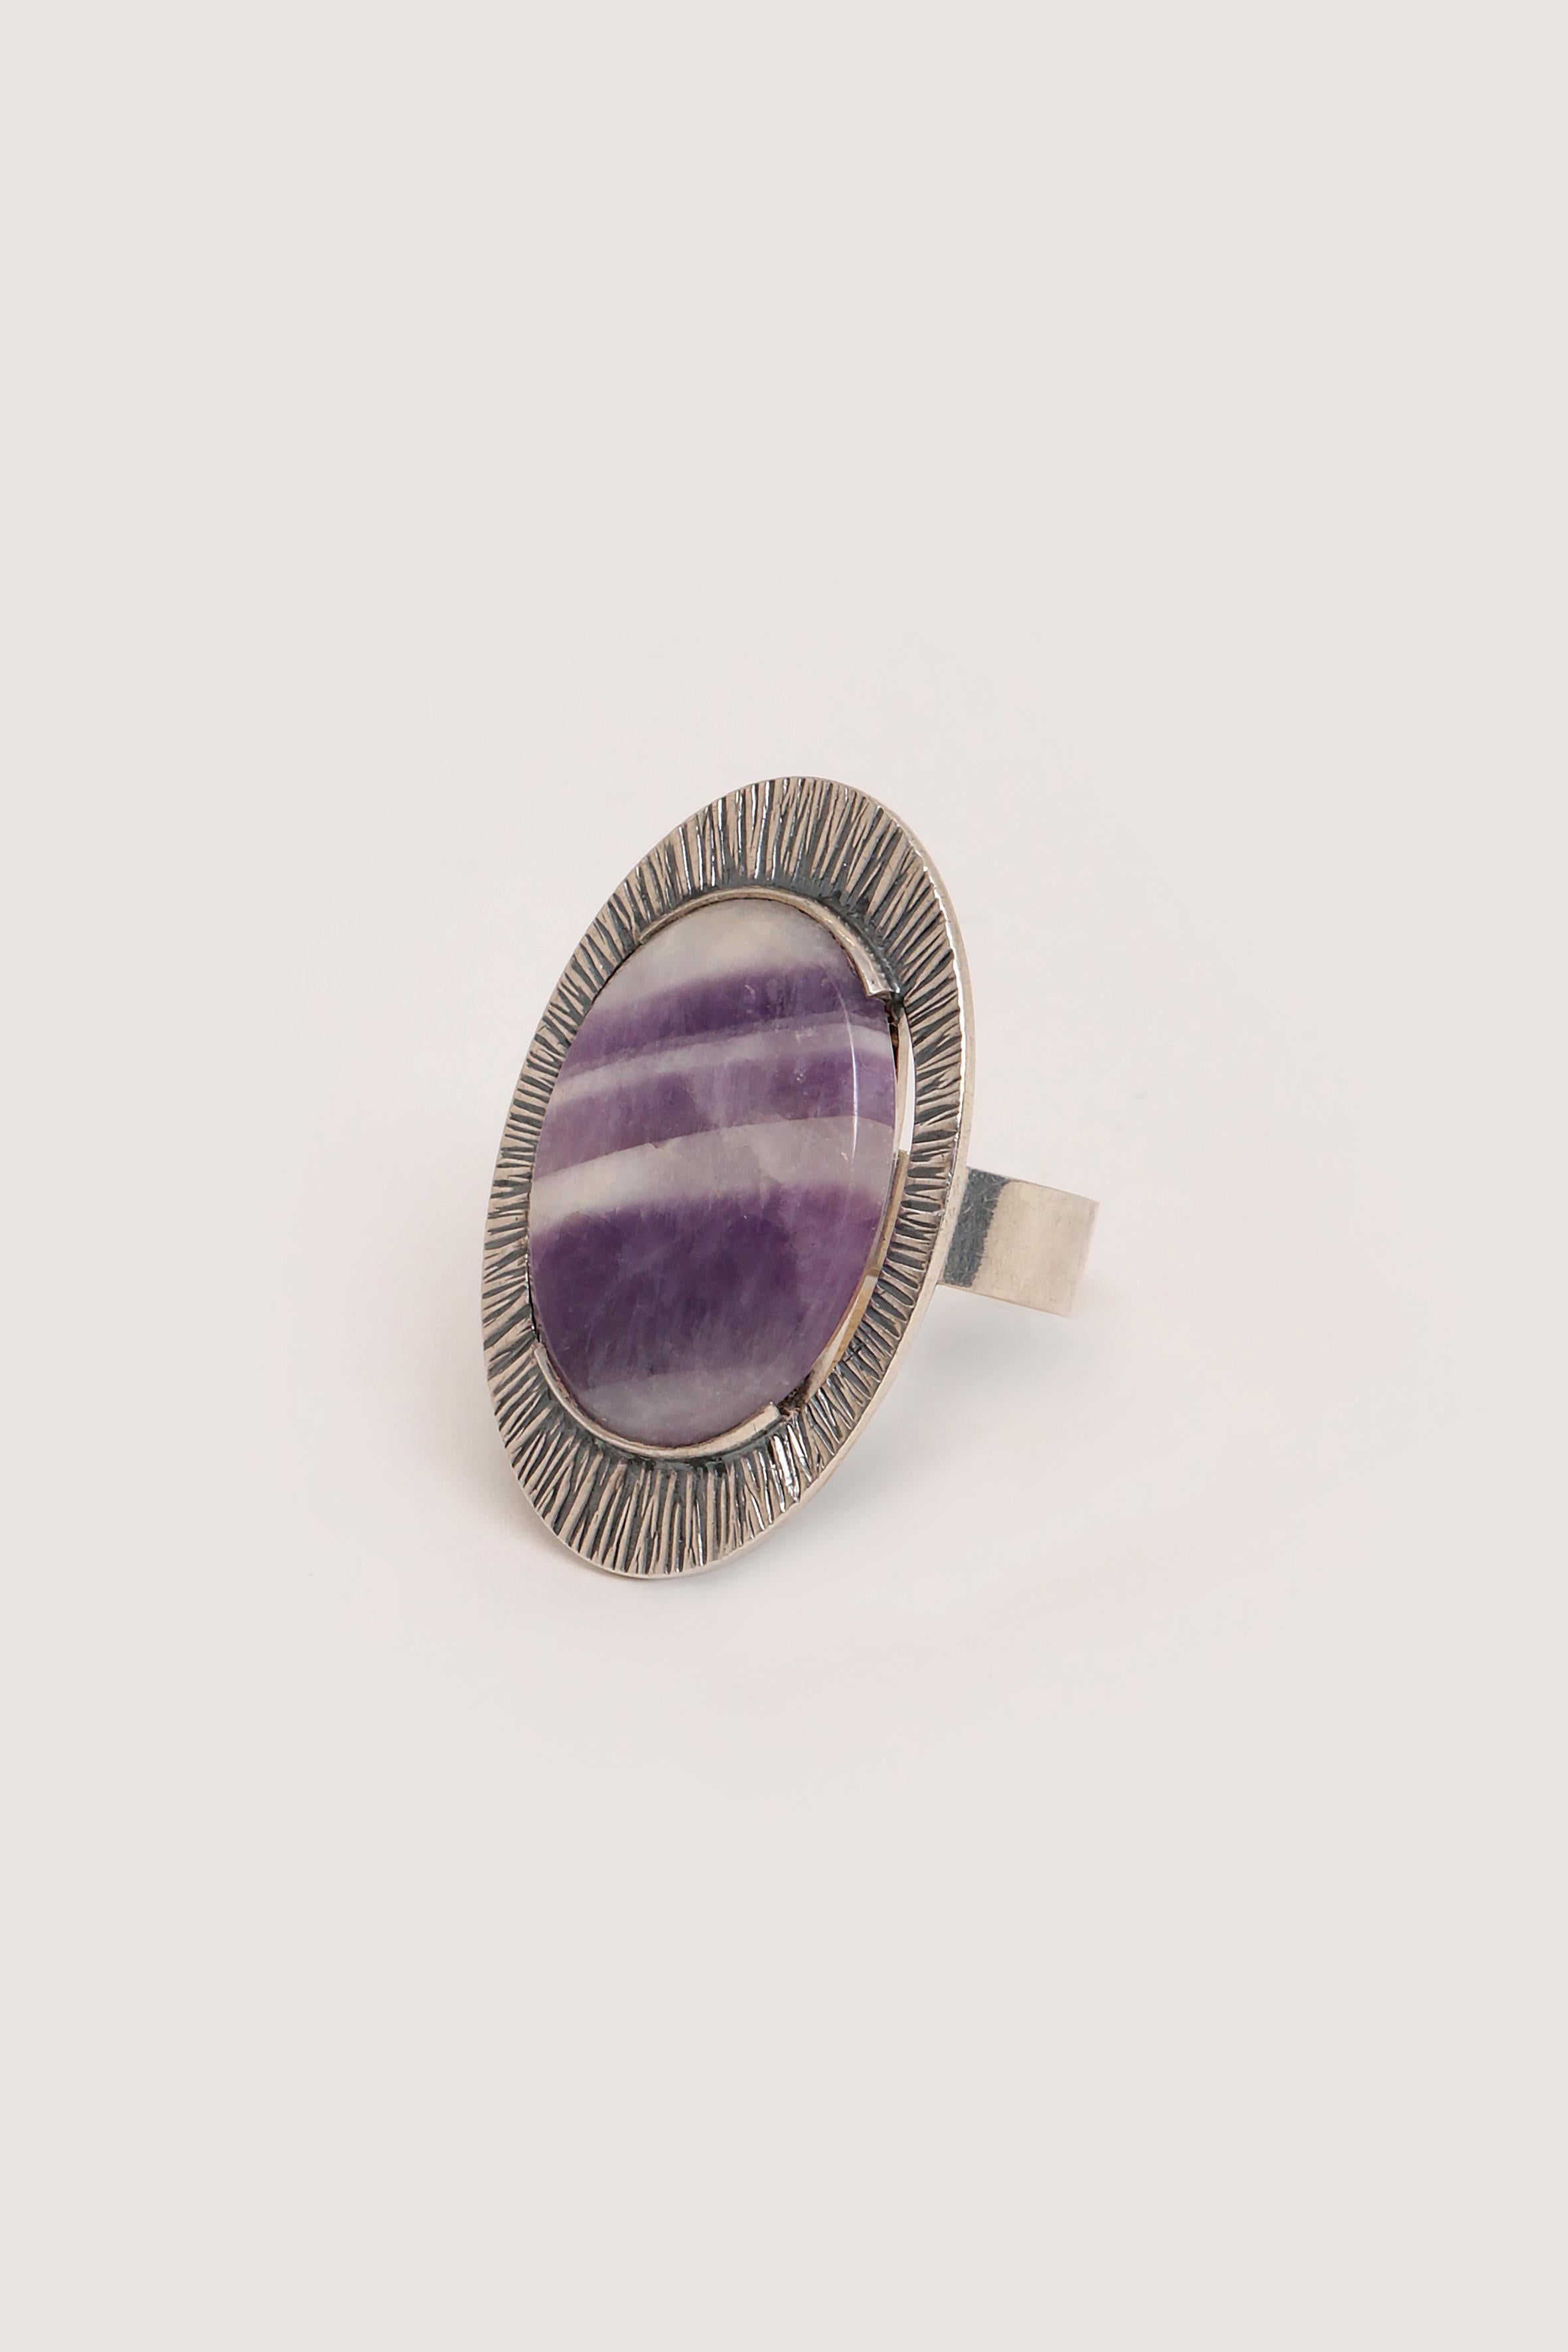 Silver ring Design by Elis Kauppi Kupittaan Kulta with Amethyst, 1970


Beautiful Vintage ring in a modern style by Elis Kauppi Kupittaan Kulta from Finland. Stamped with the logo and 925s Finland. Truly unique.

Elis Kauppi was one of the most